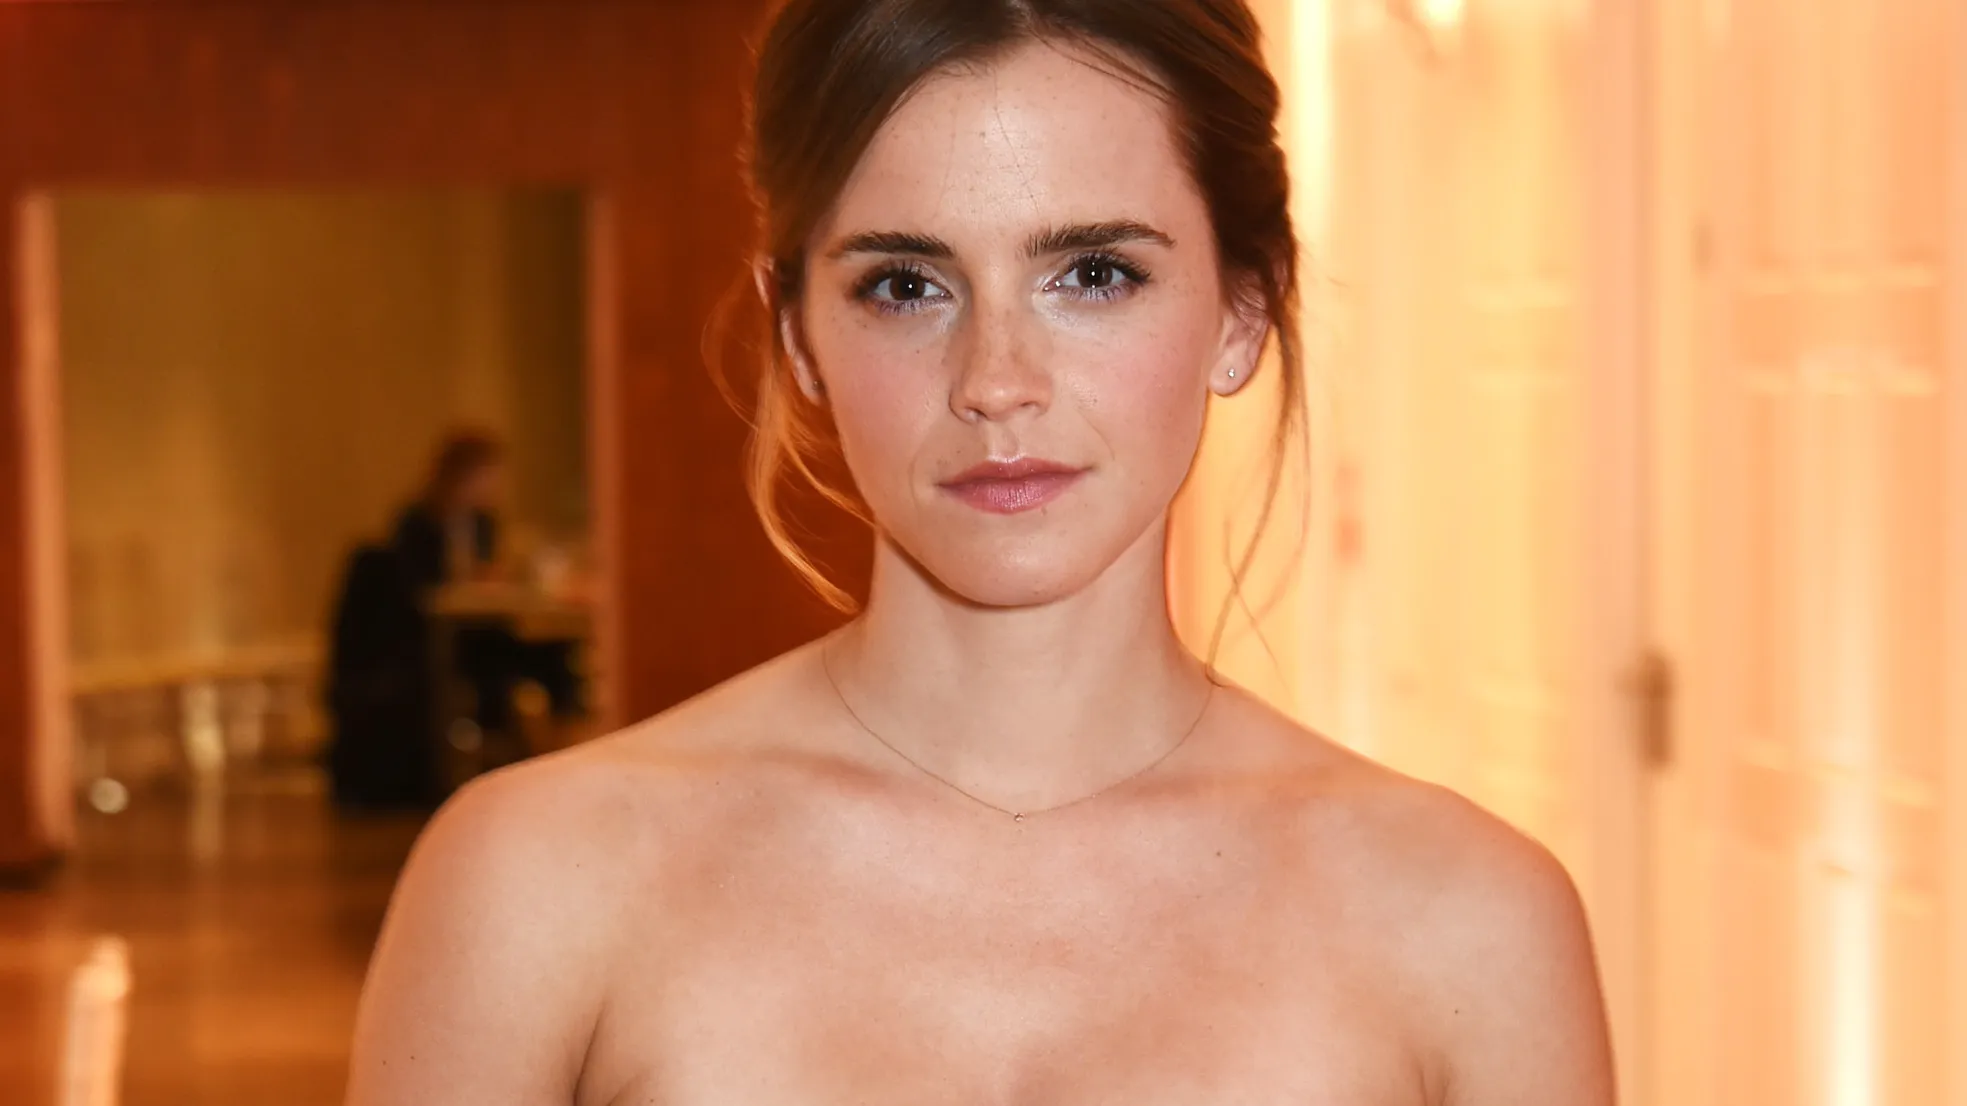 Celebrity Porn Emma Watson - Emma Watson's private photos leaked online - The Tech Edvocate